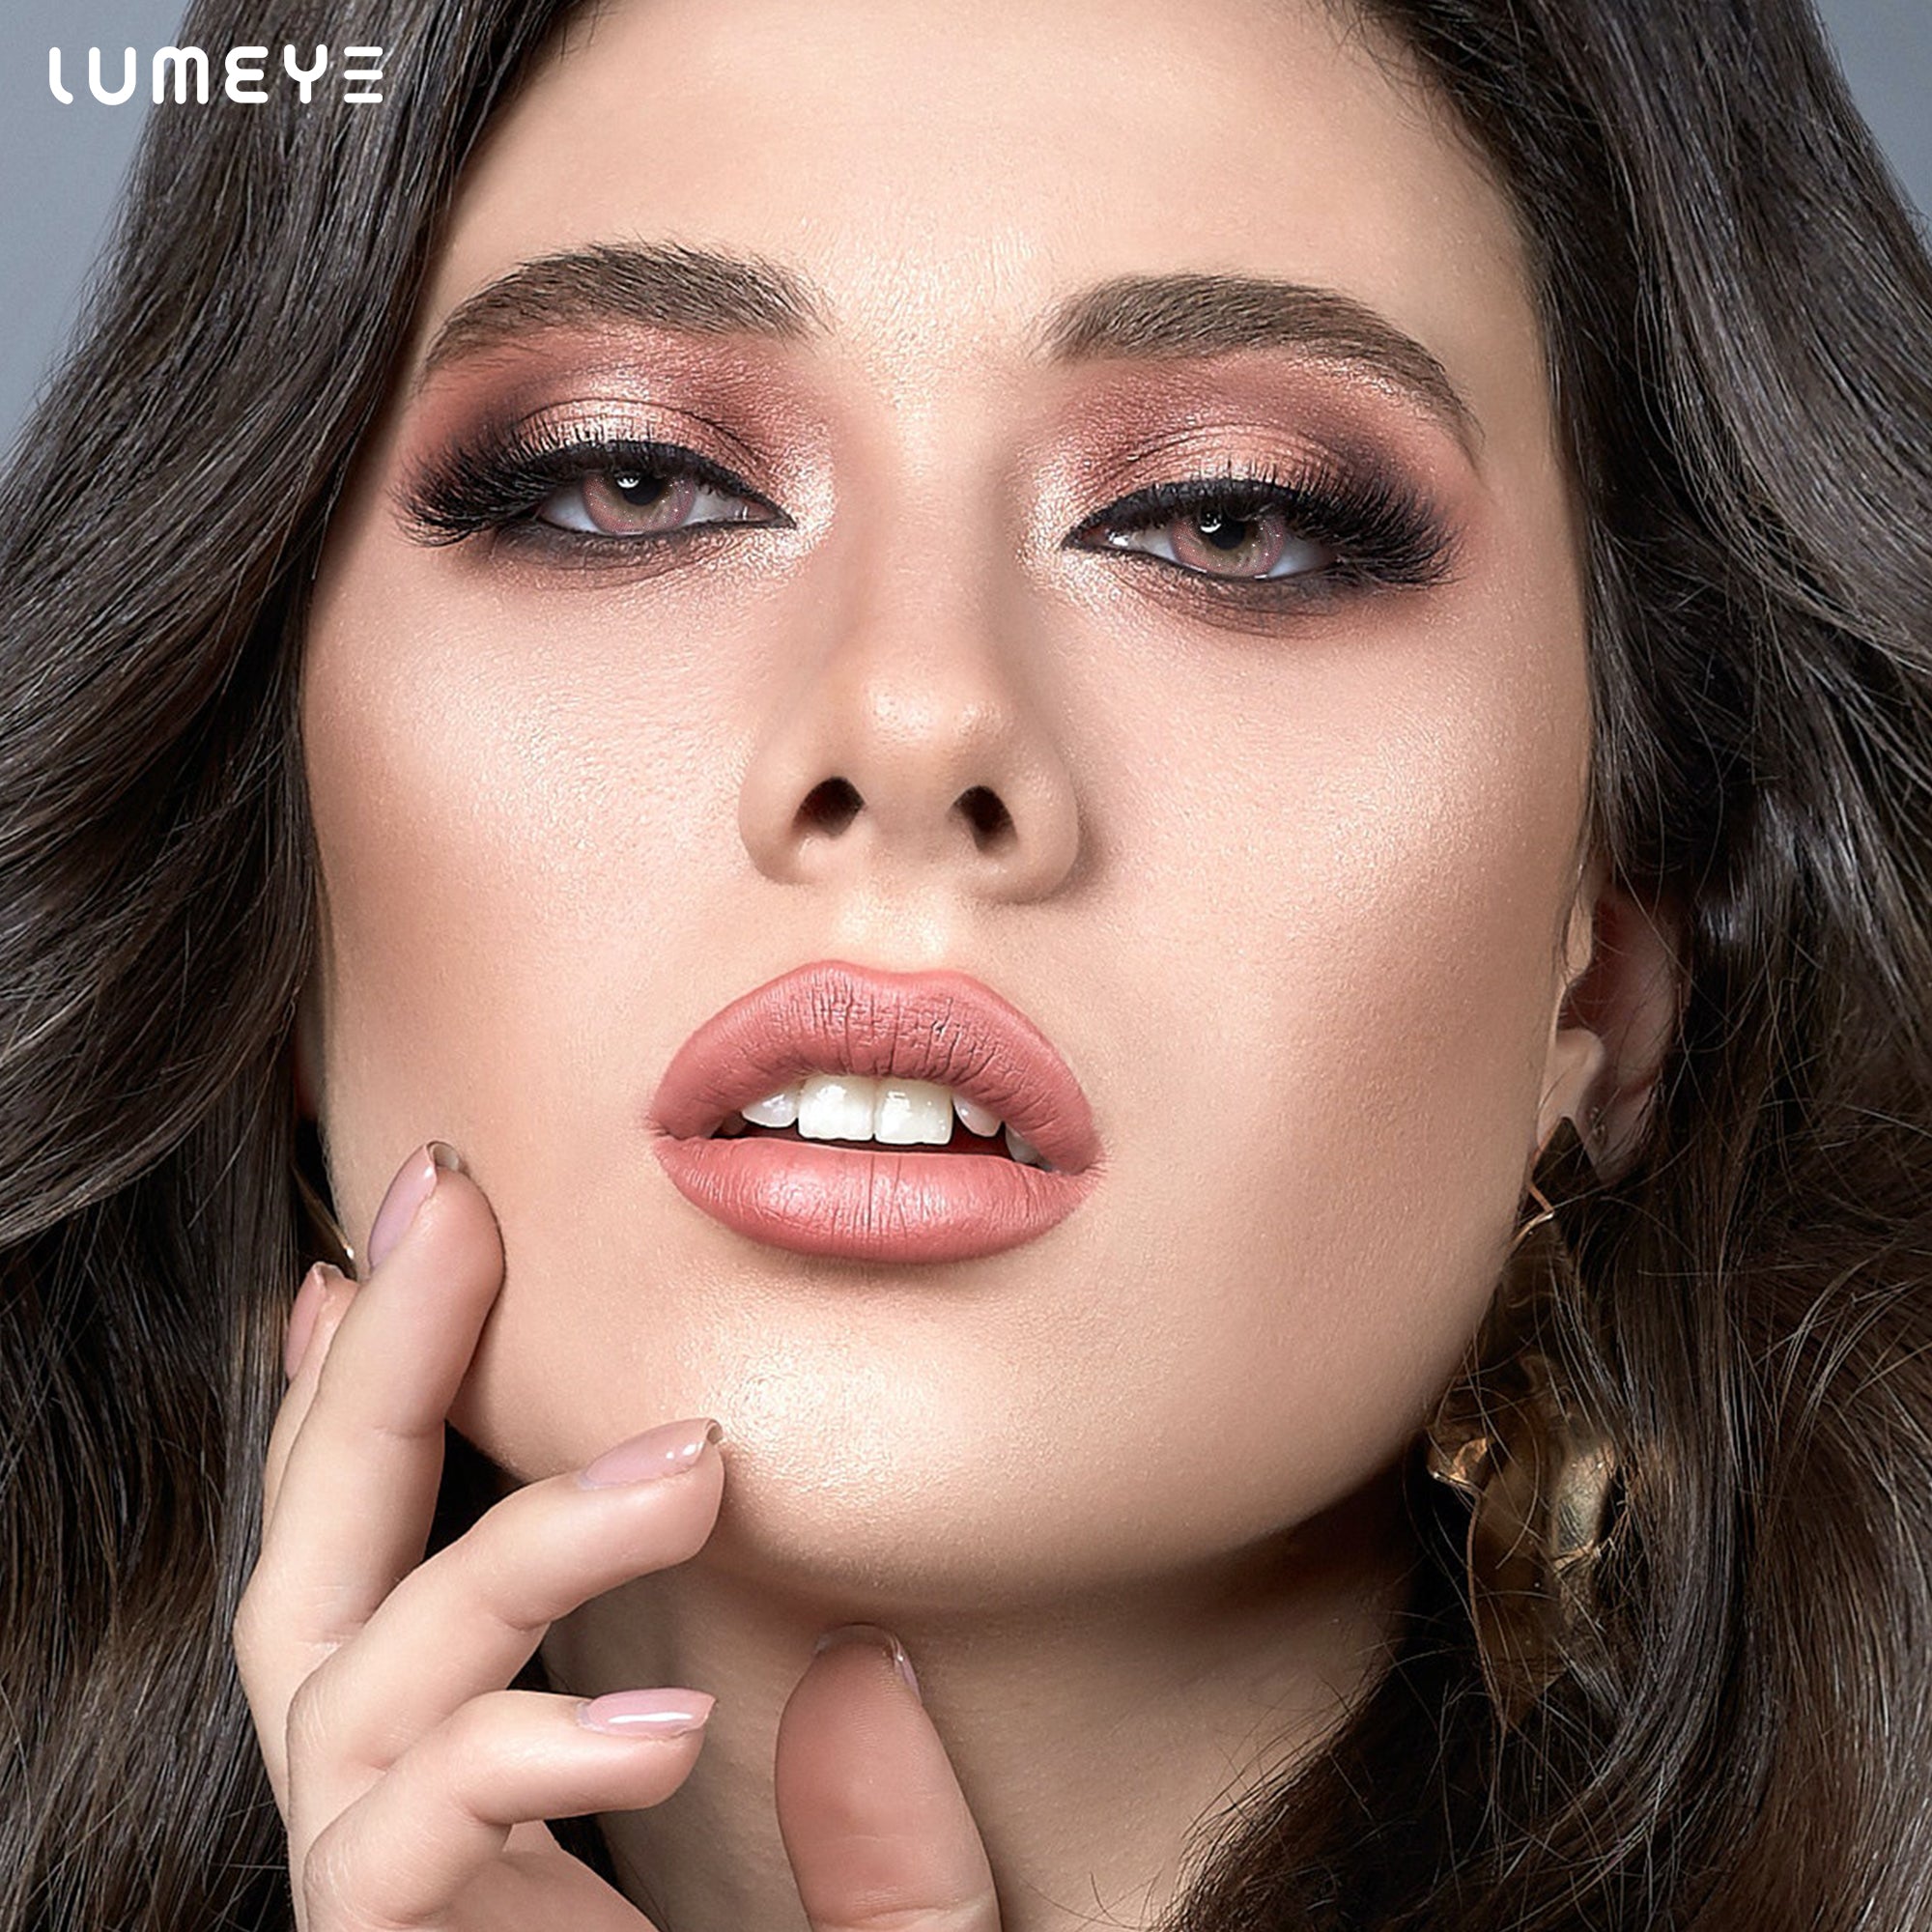 Best COLORED CONTACTS - LUMEYE Flowing Galaxy Pink Colored Contact Lenses - LUMEYE